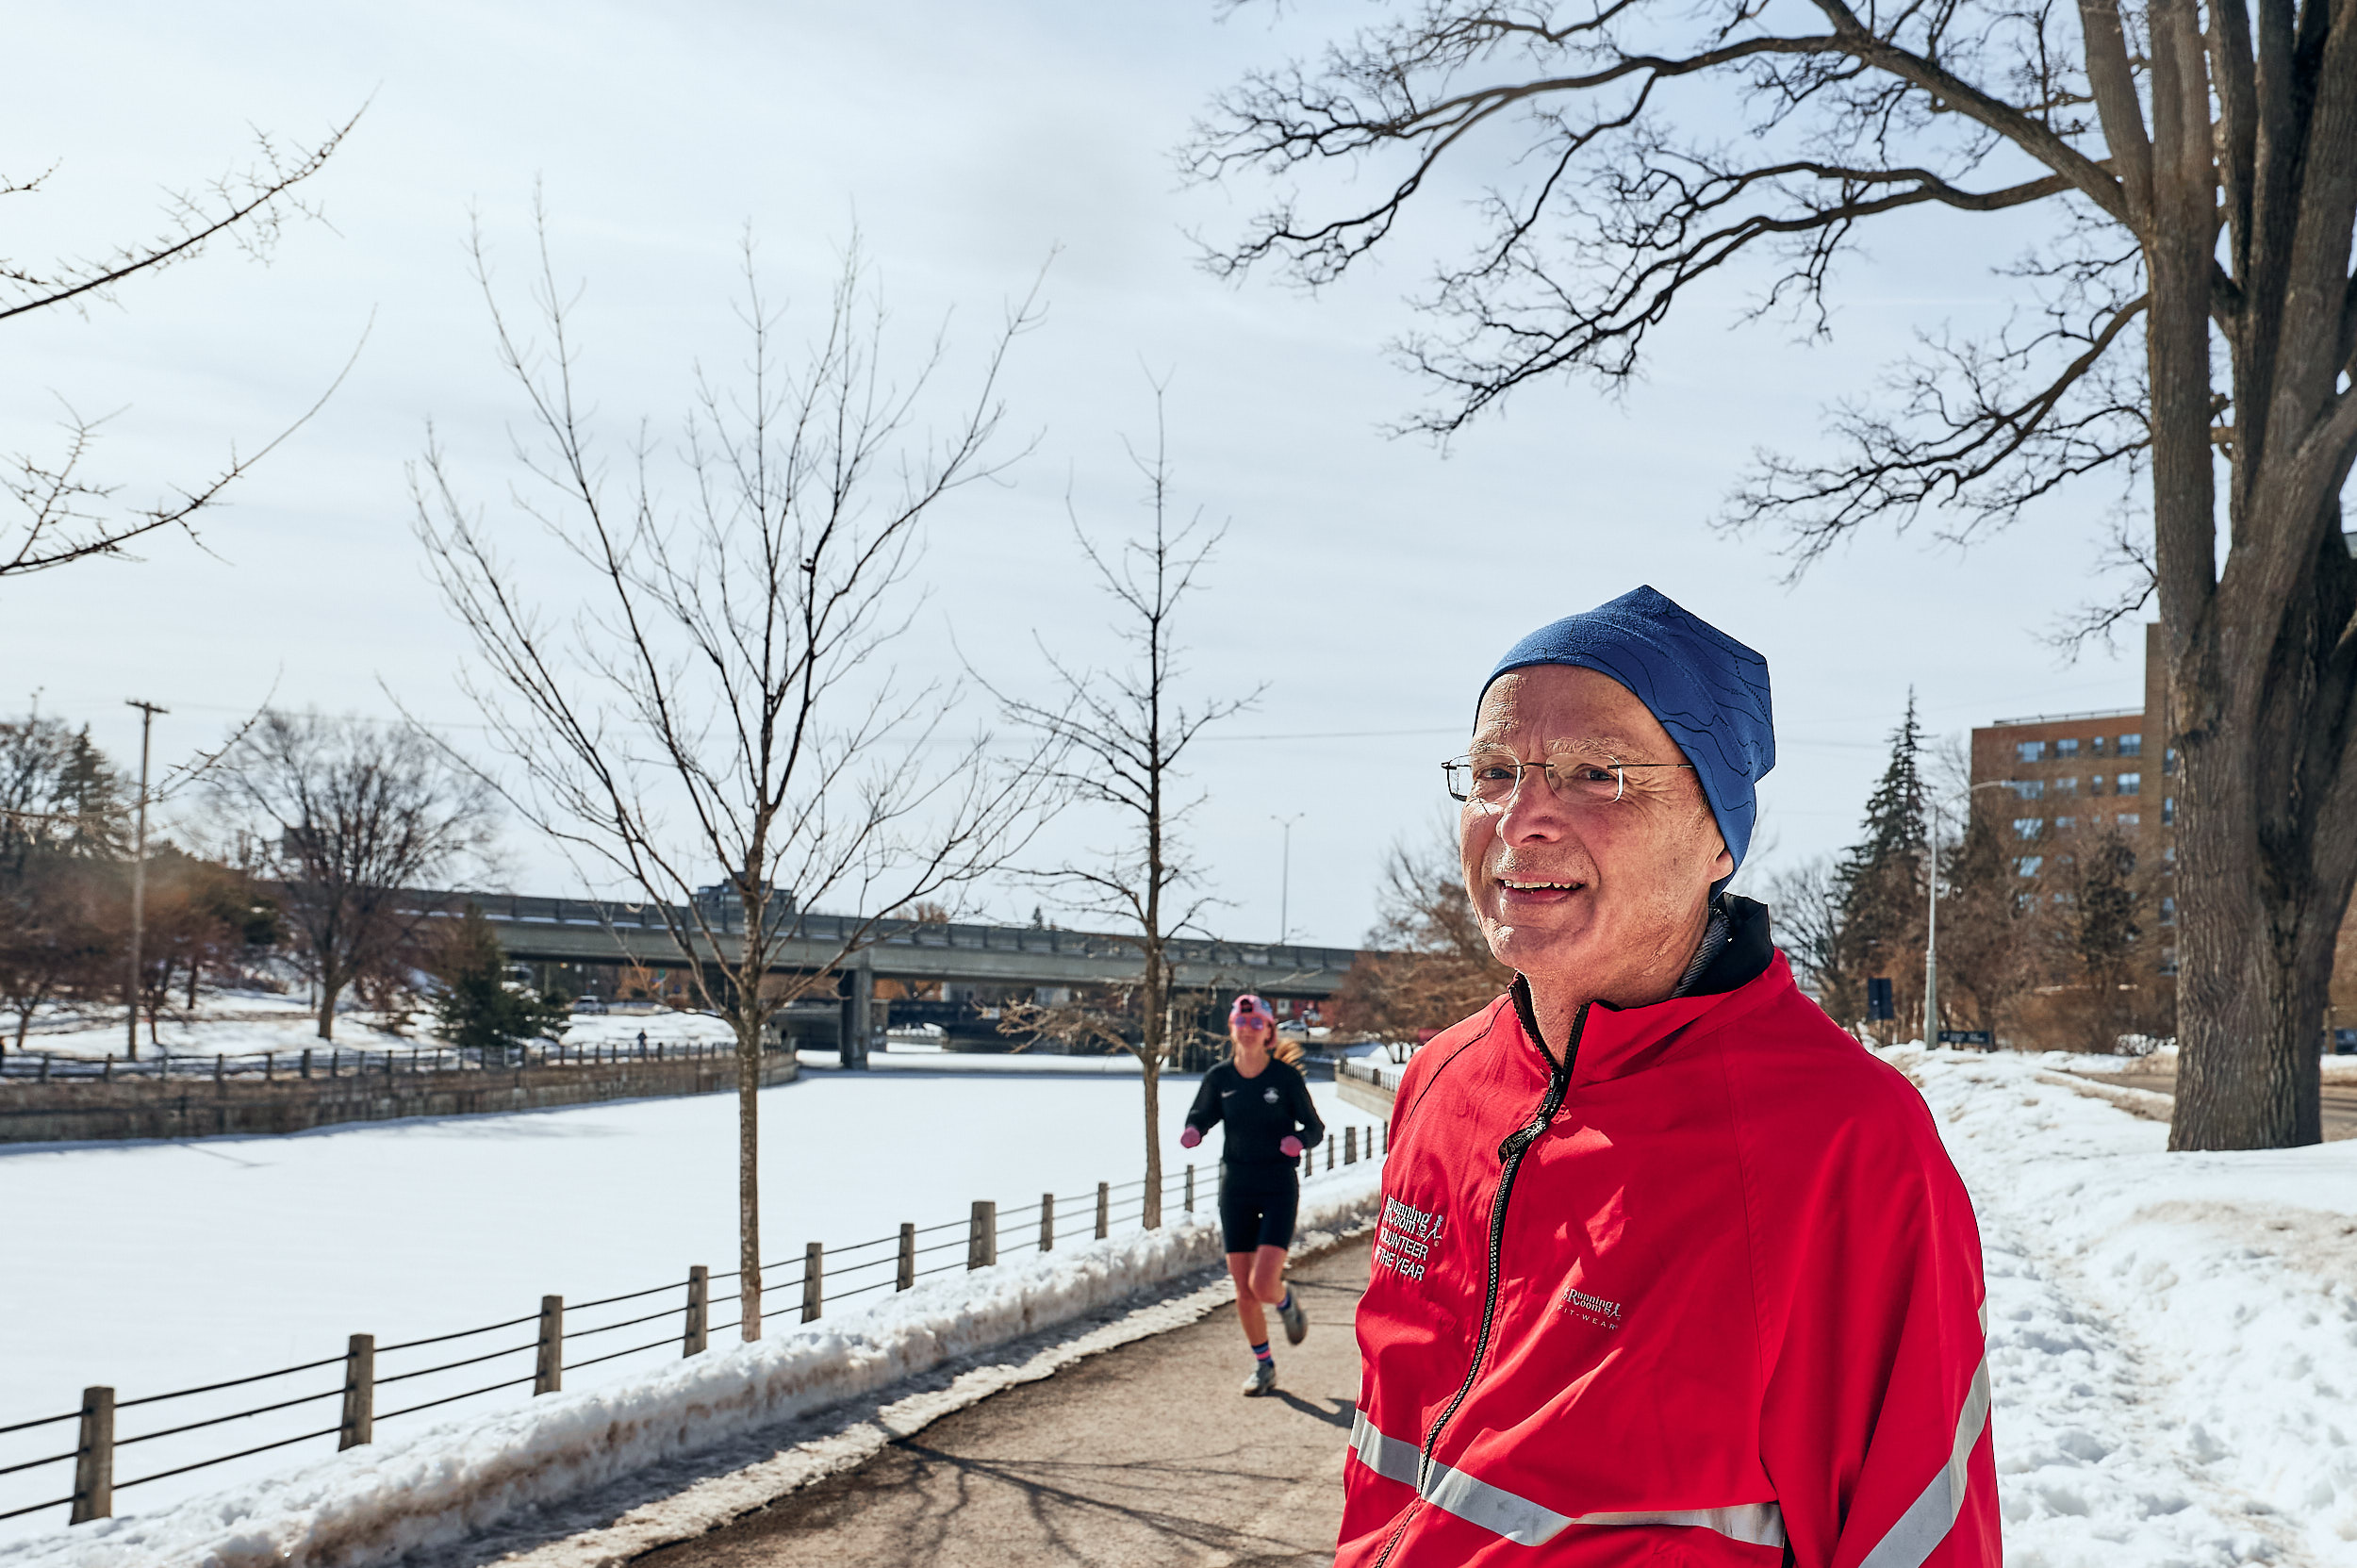 Ian Hunter runs along the Rideau Canal, and missed the sounds of skating crowds this winter.